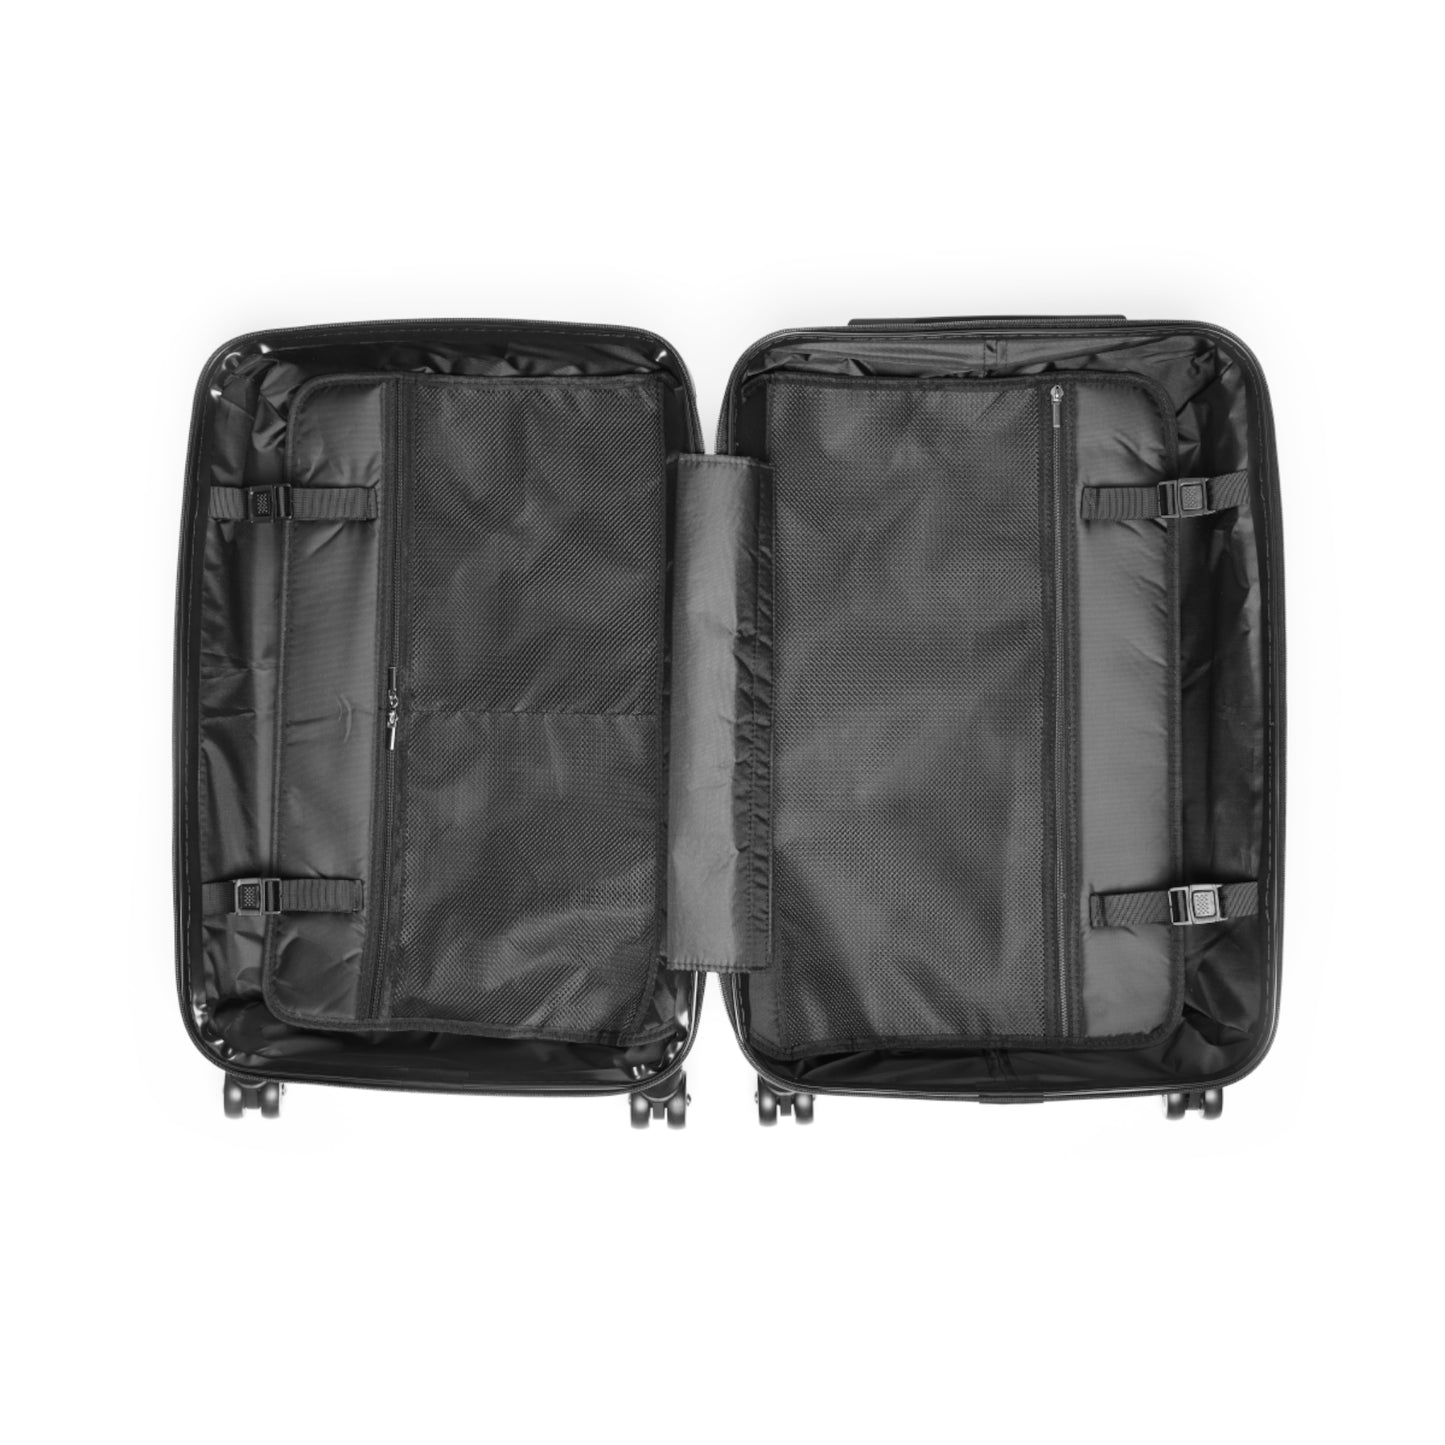 two pieces of black luggage sitting on top of each other